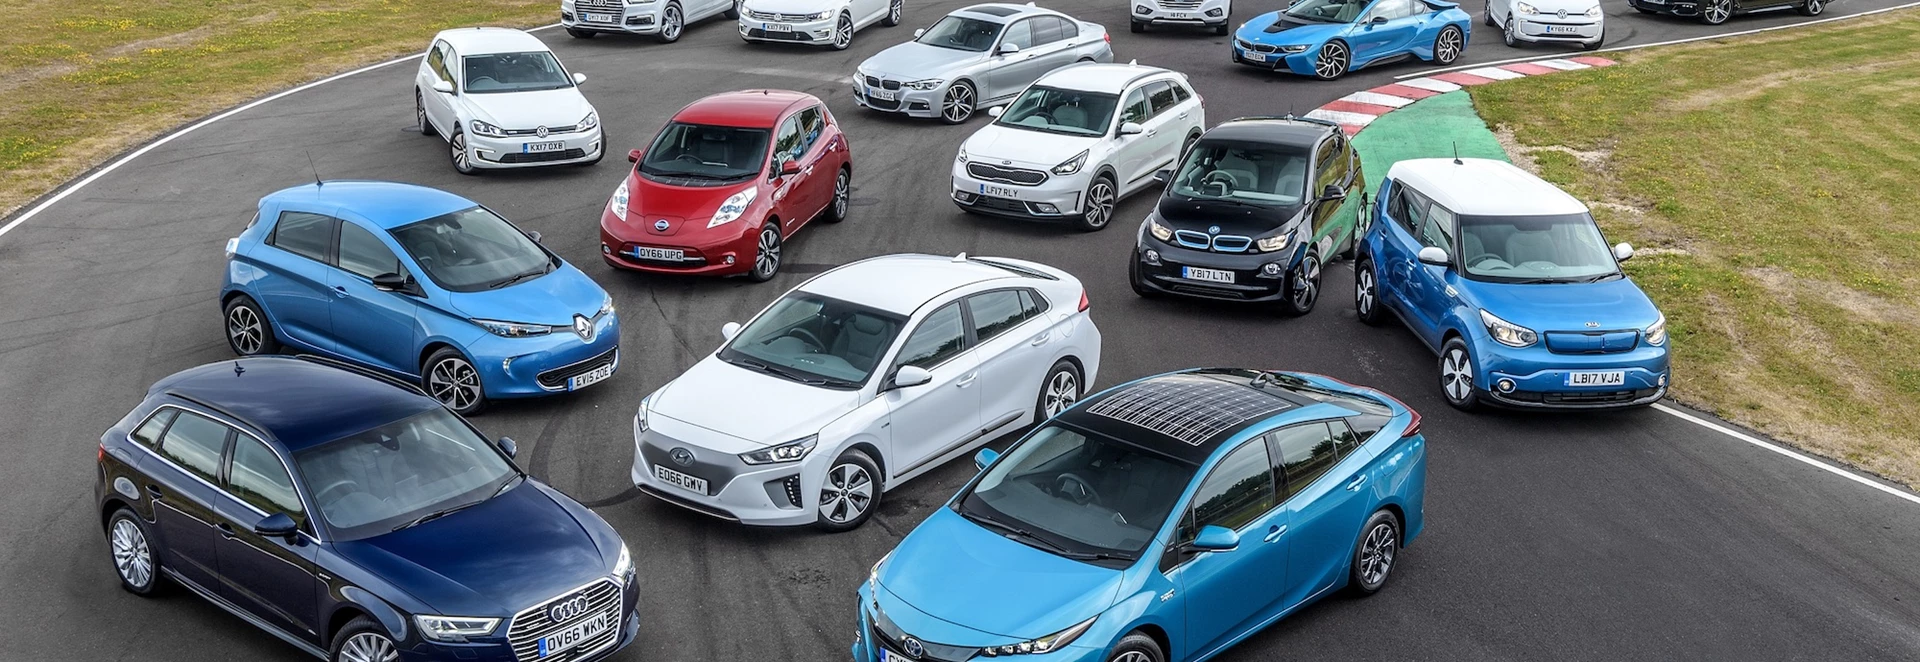 10 electric vehicle myths busted